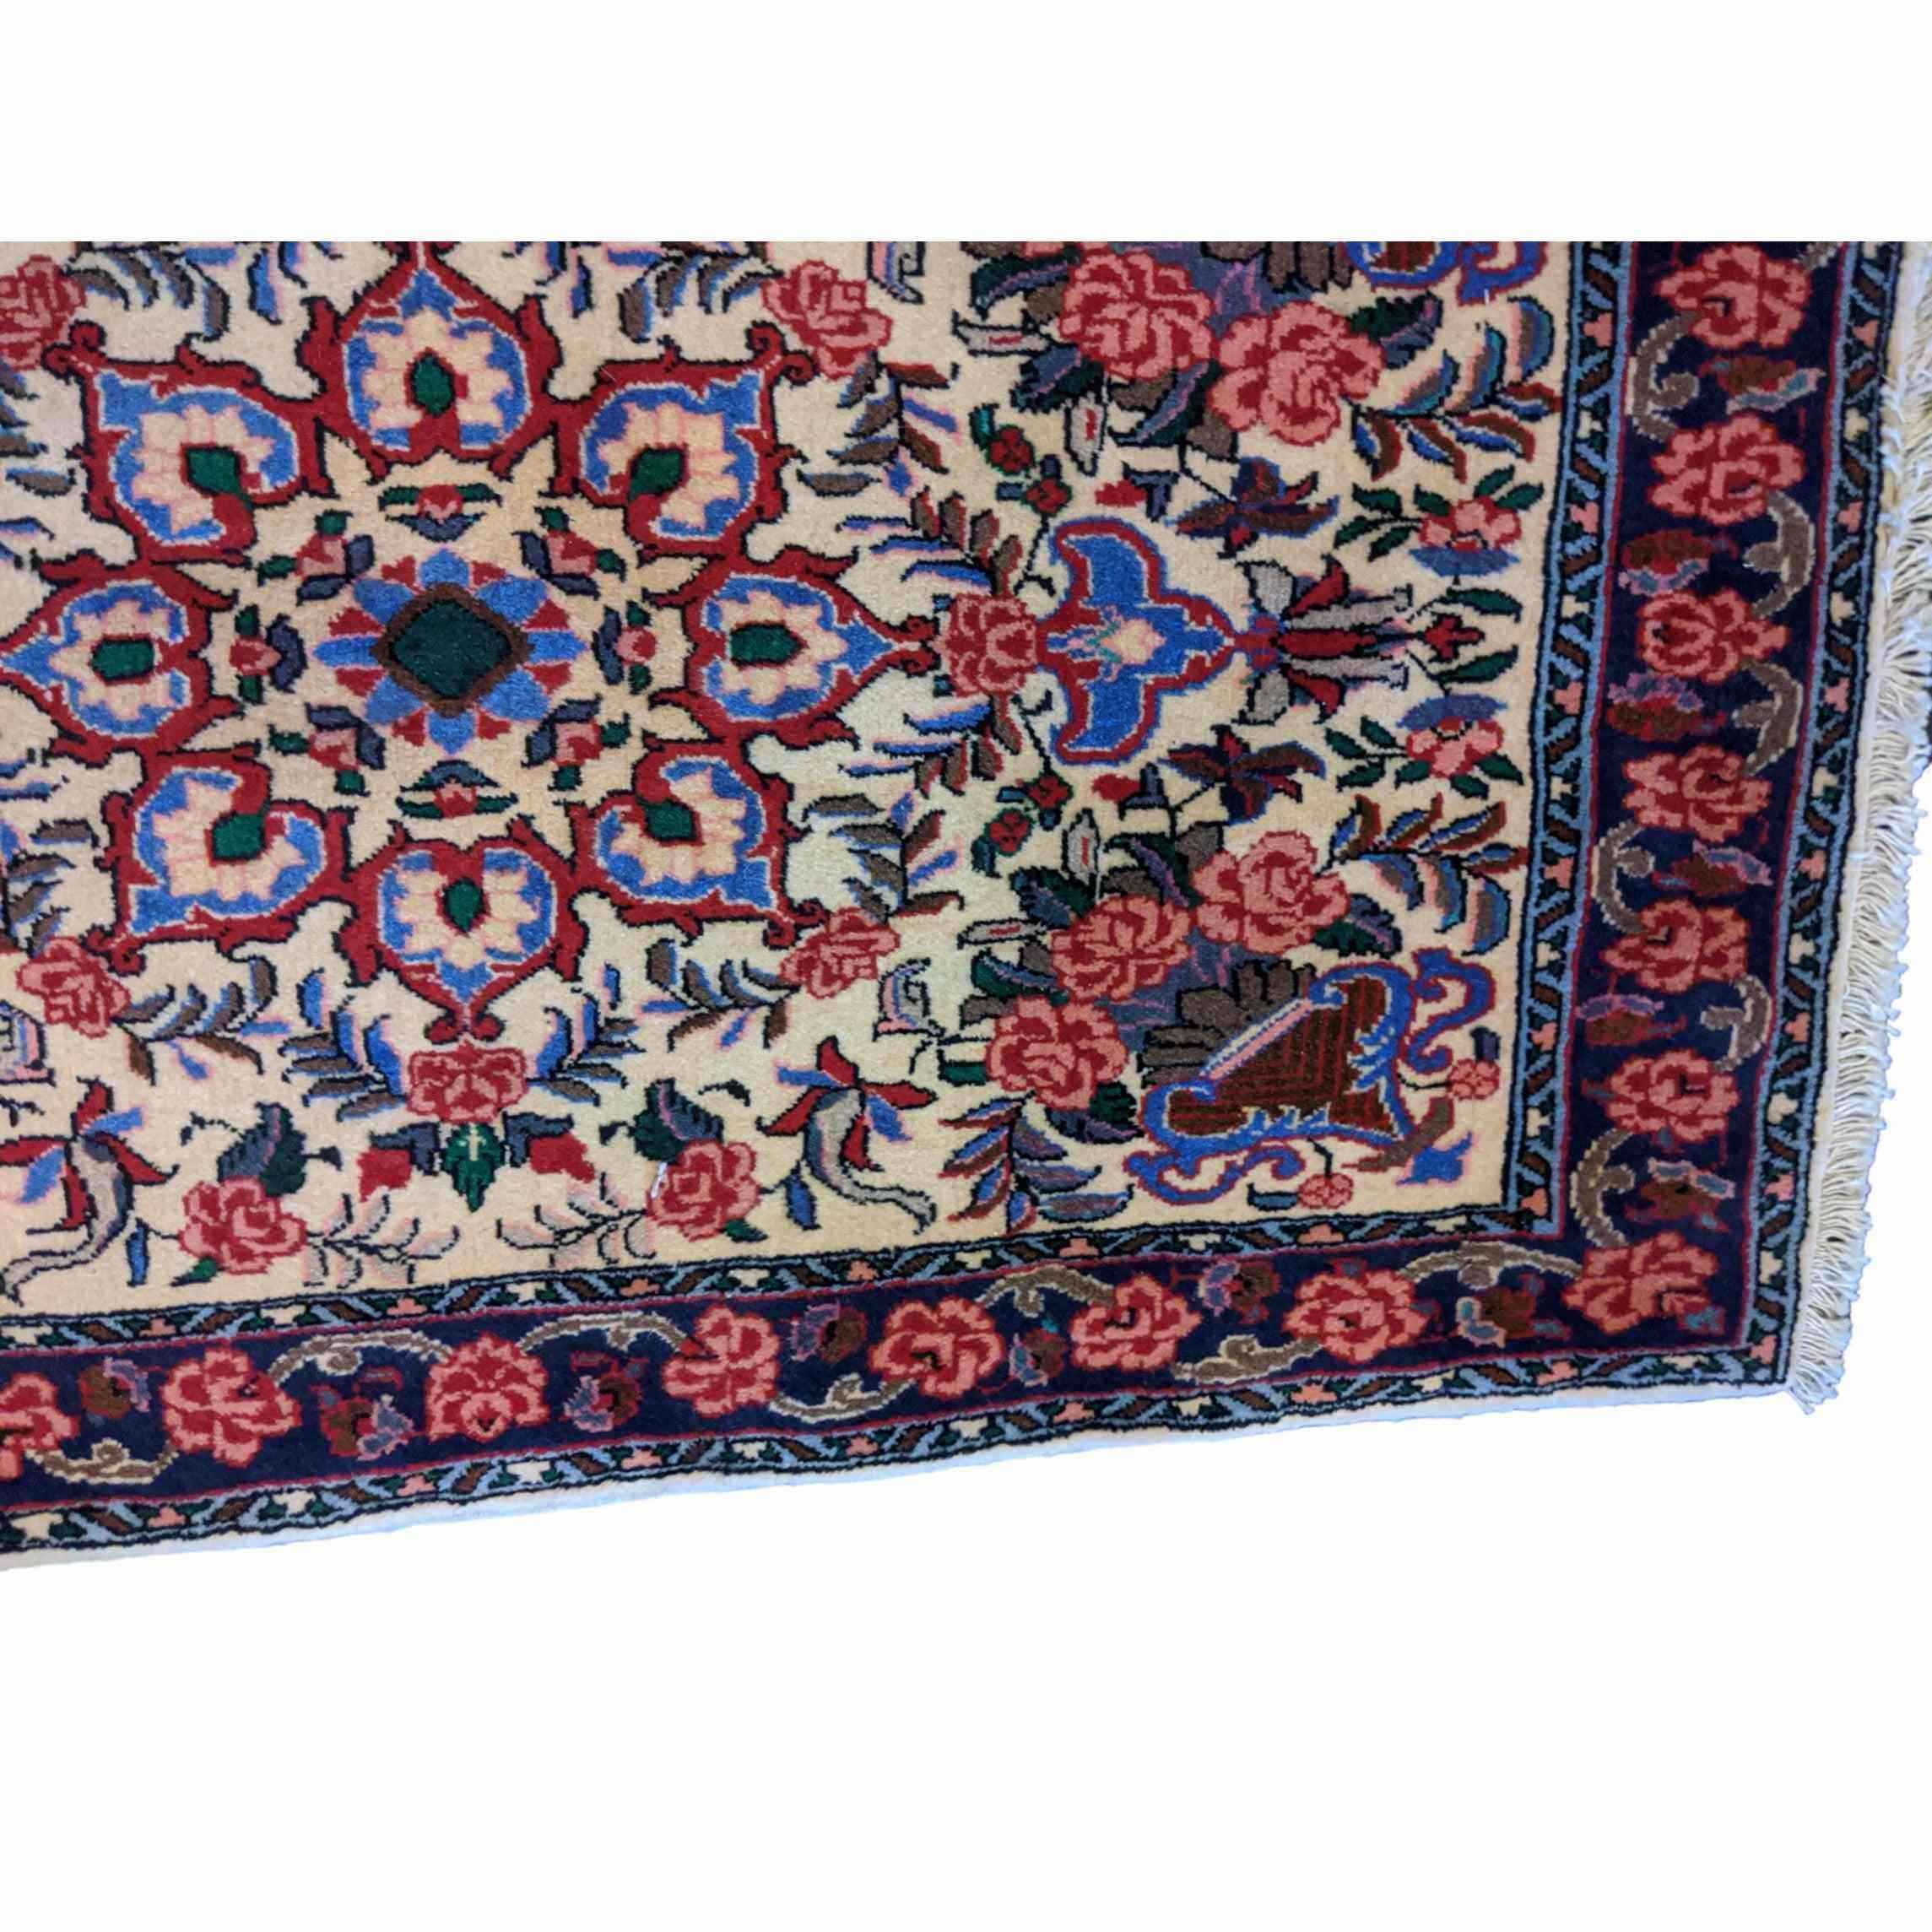 120 x 76 cm Fine Persian Saroq Traditional Beige Small Rug - Rugmaster